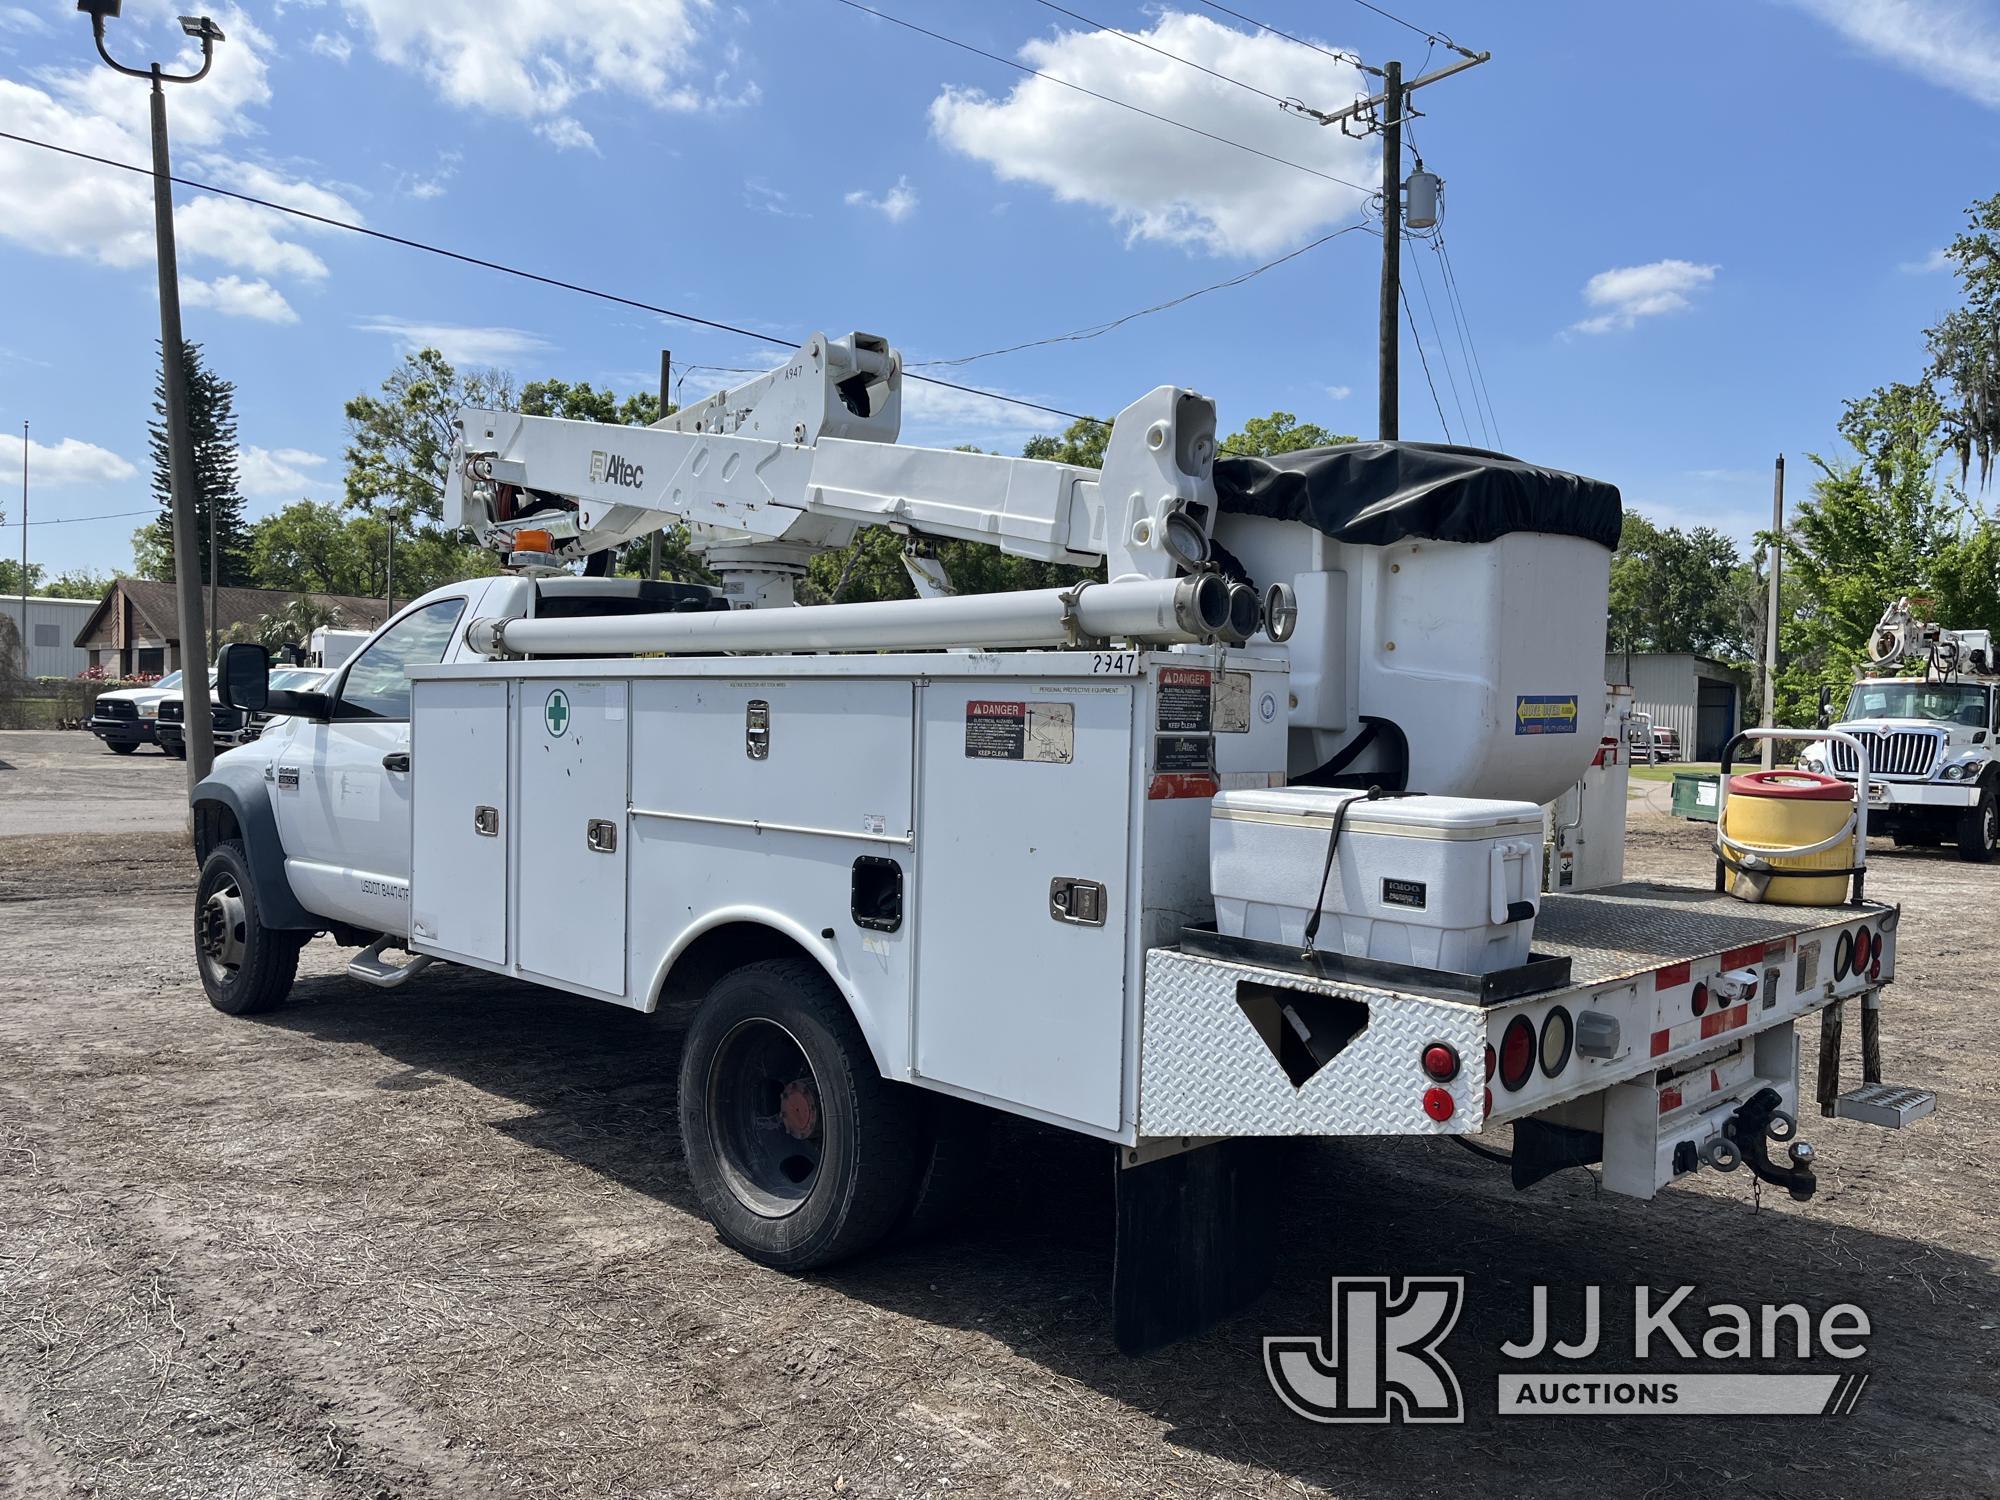 (Tampa, FL) Altec AT37G, Articulating & Telescopic Bucket Truck mounted behind cab on 2009 Dodge RAM